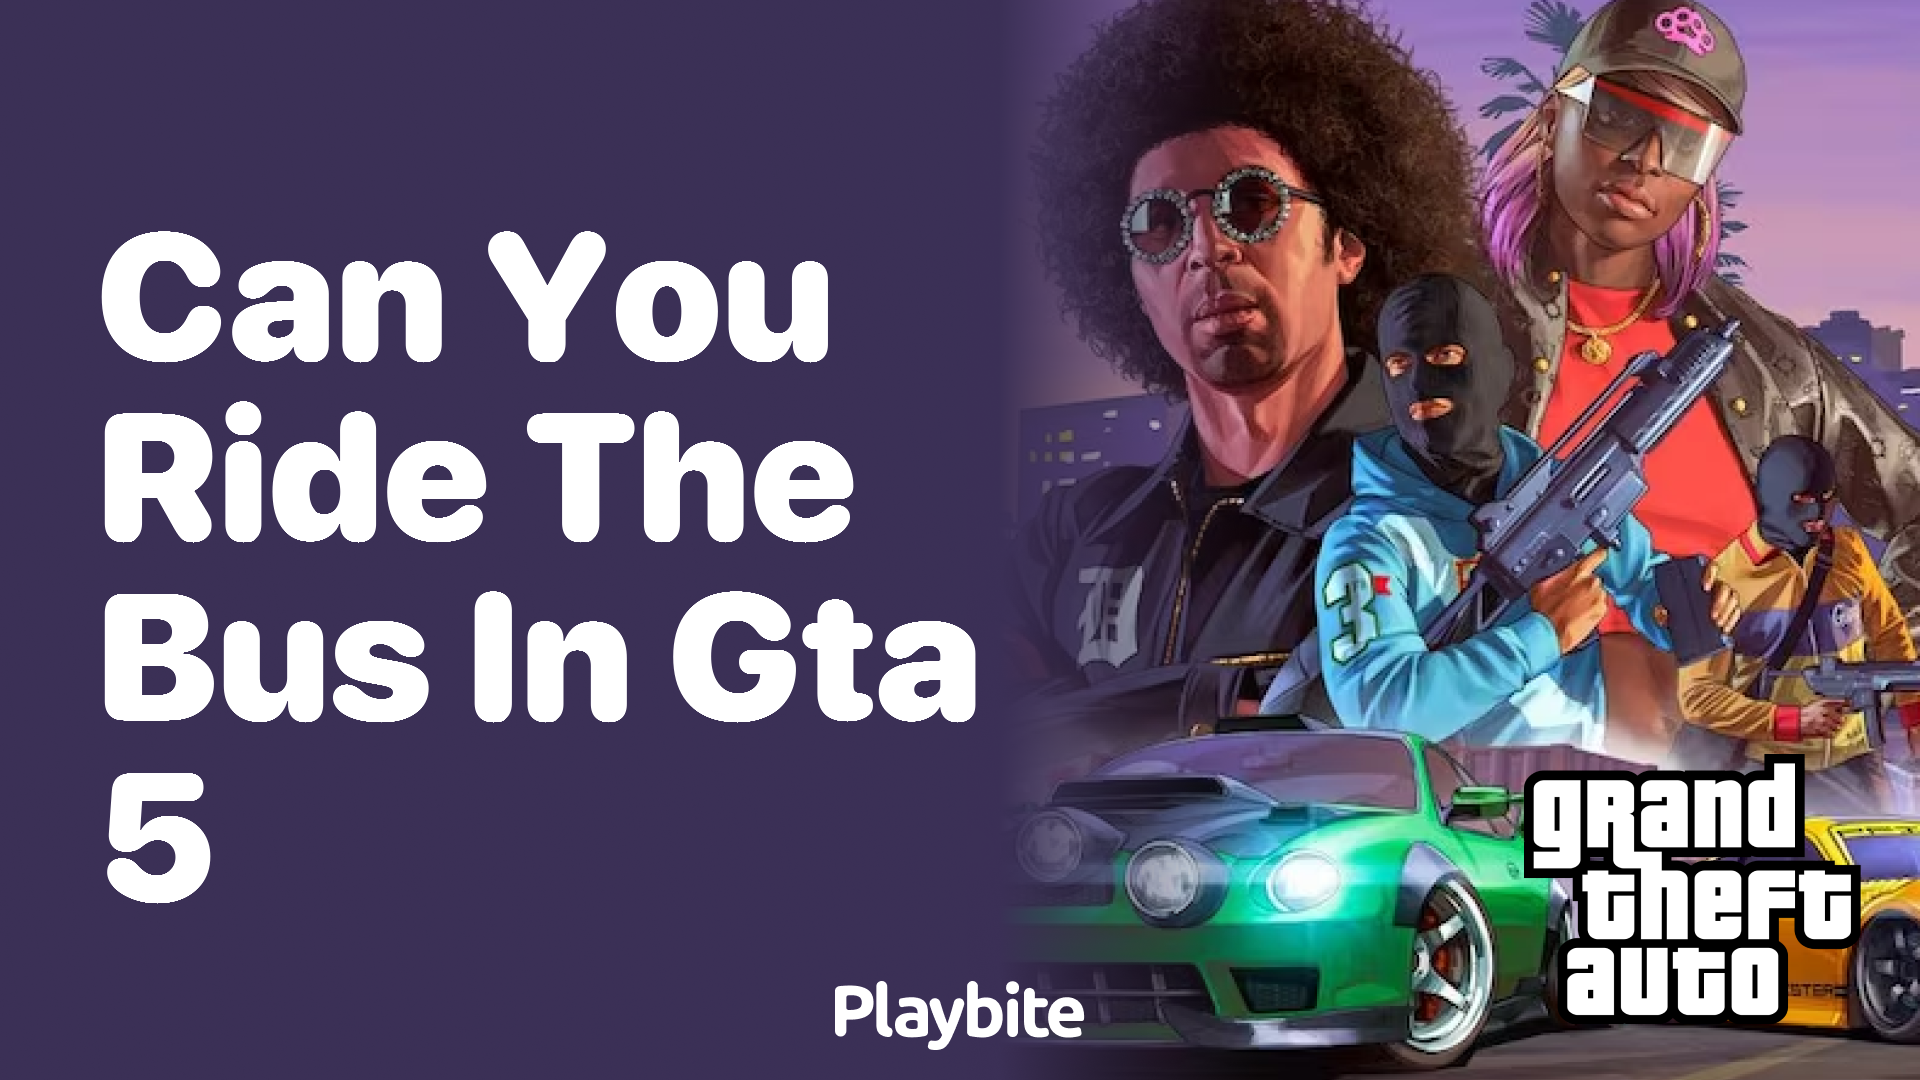 Can you ride the bus in GTA 5?